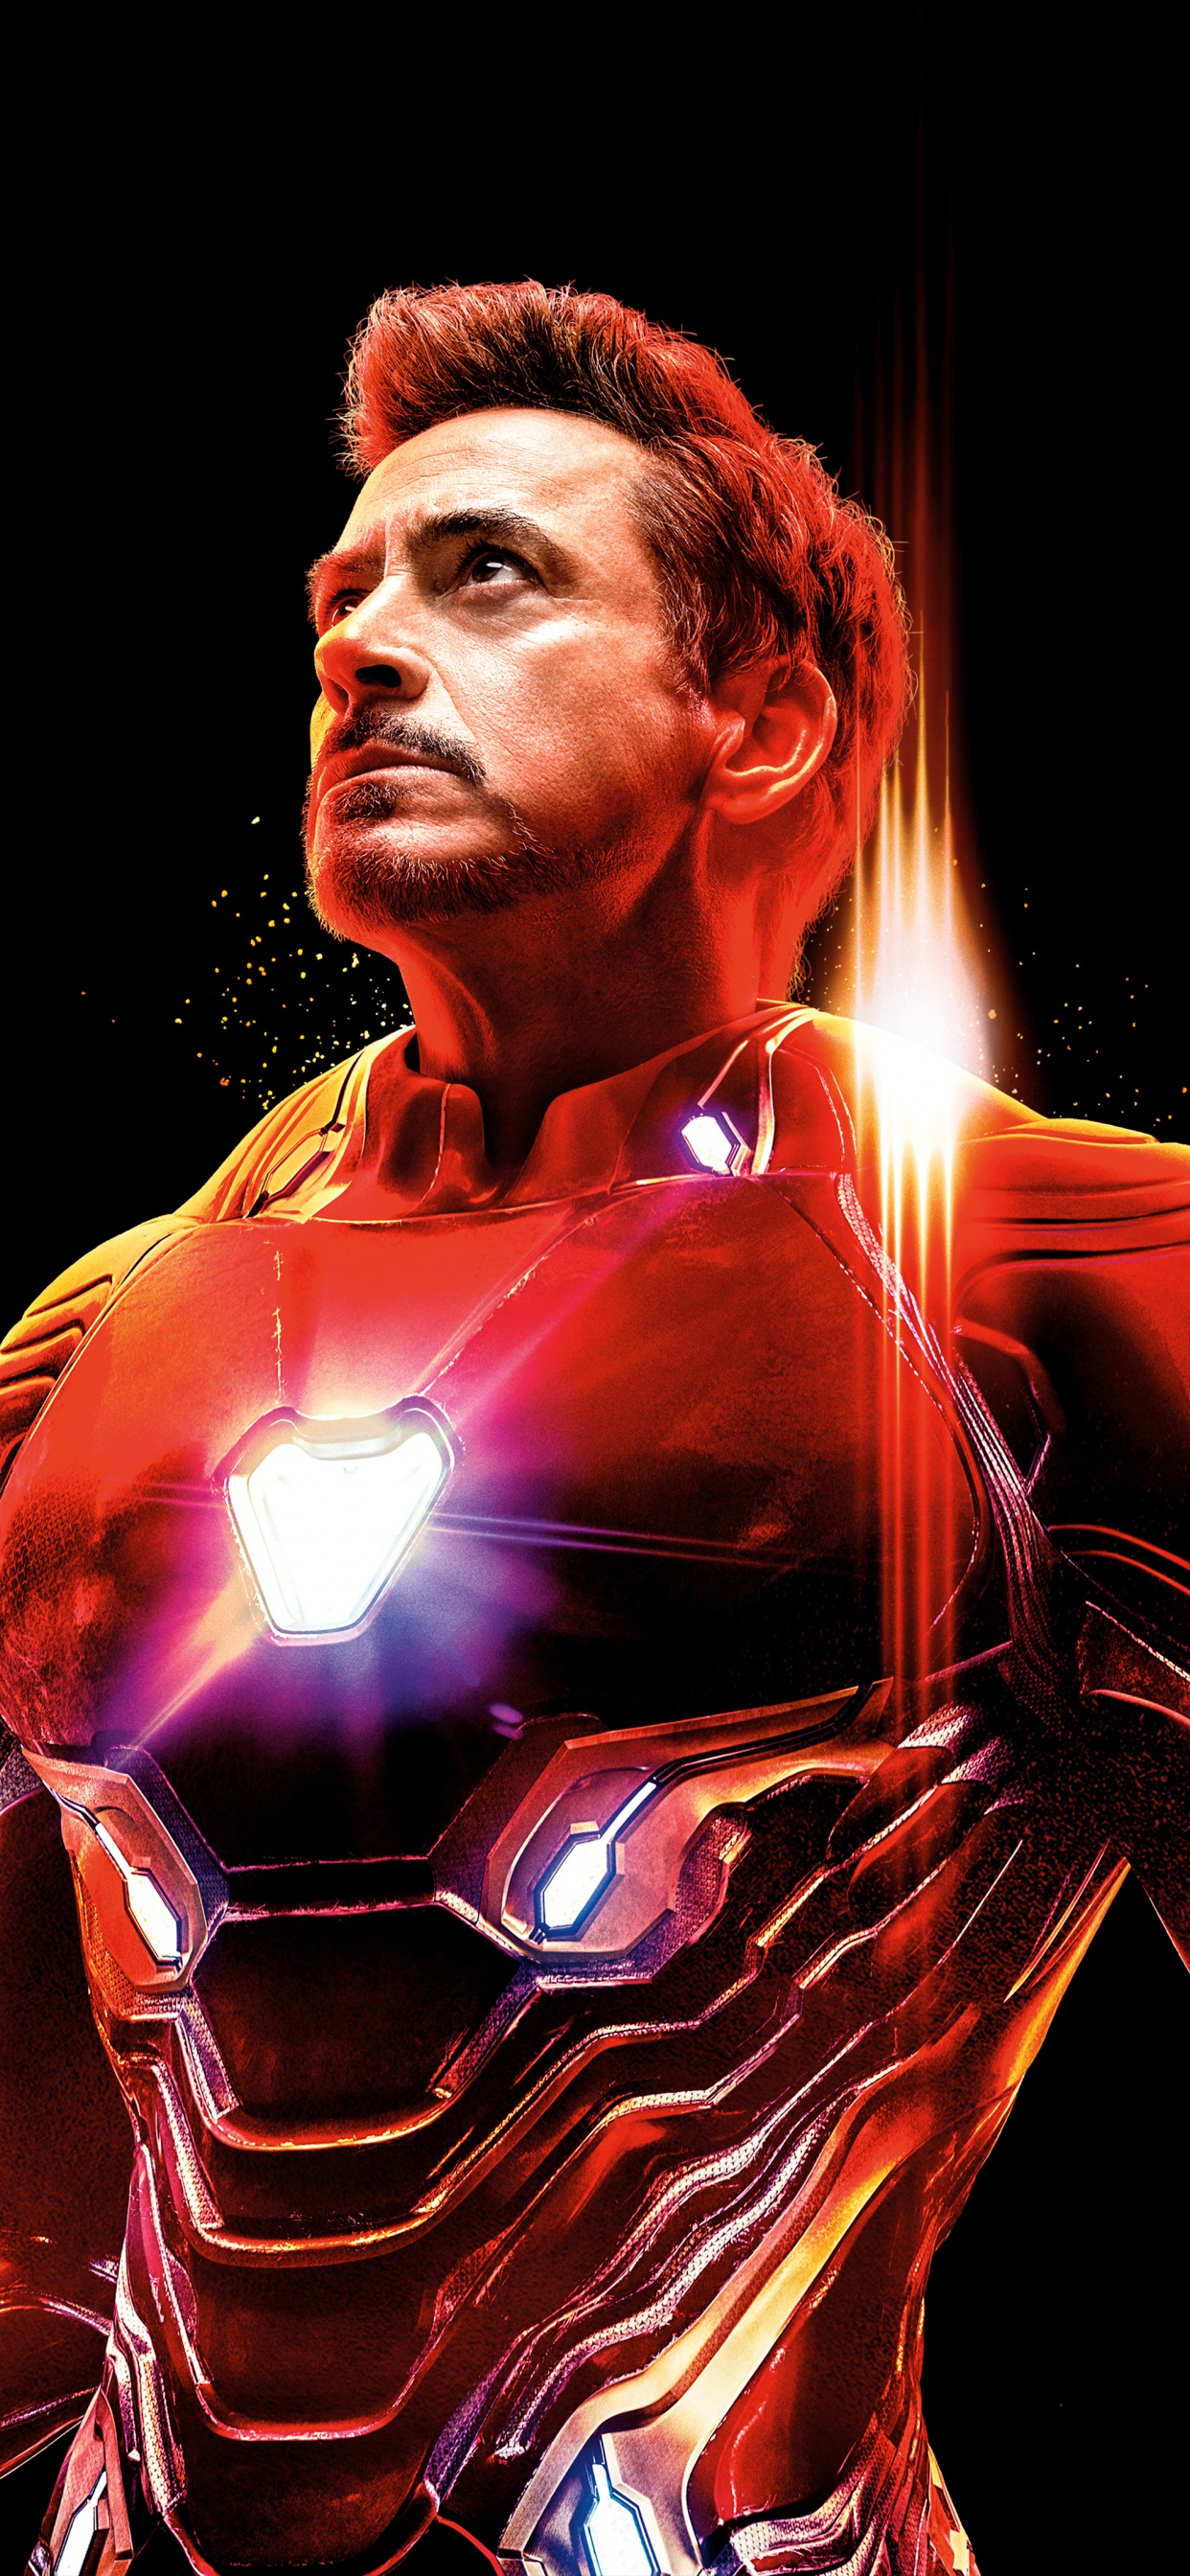 Download iPhone XS Max Marvel Iron Man Captain America Background   Wallpaperscom